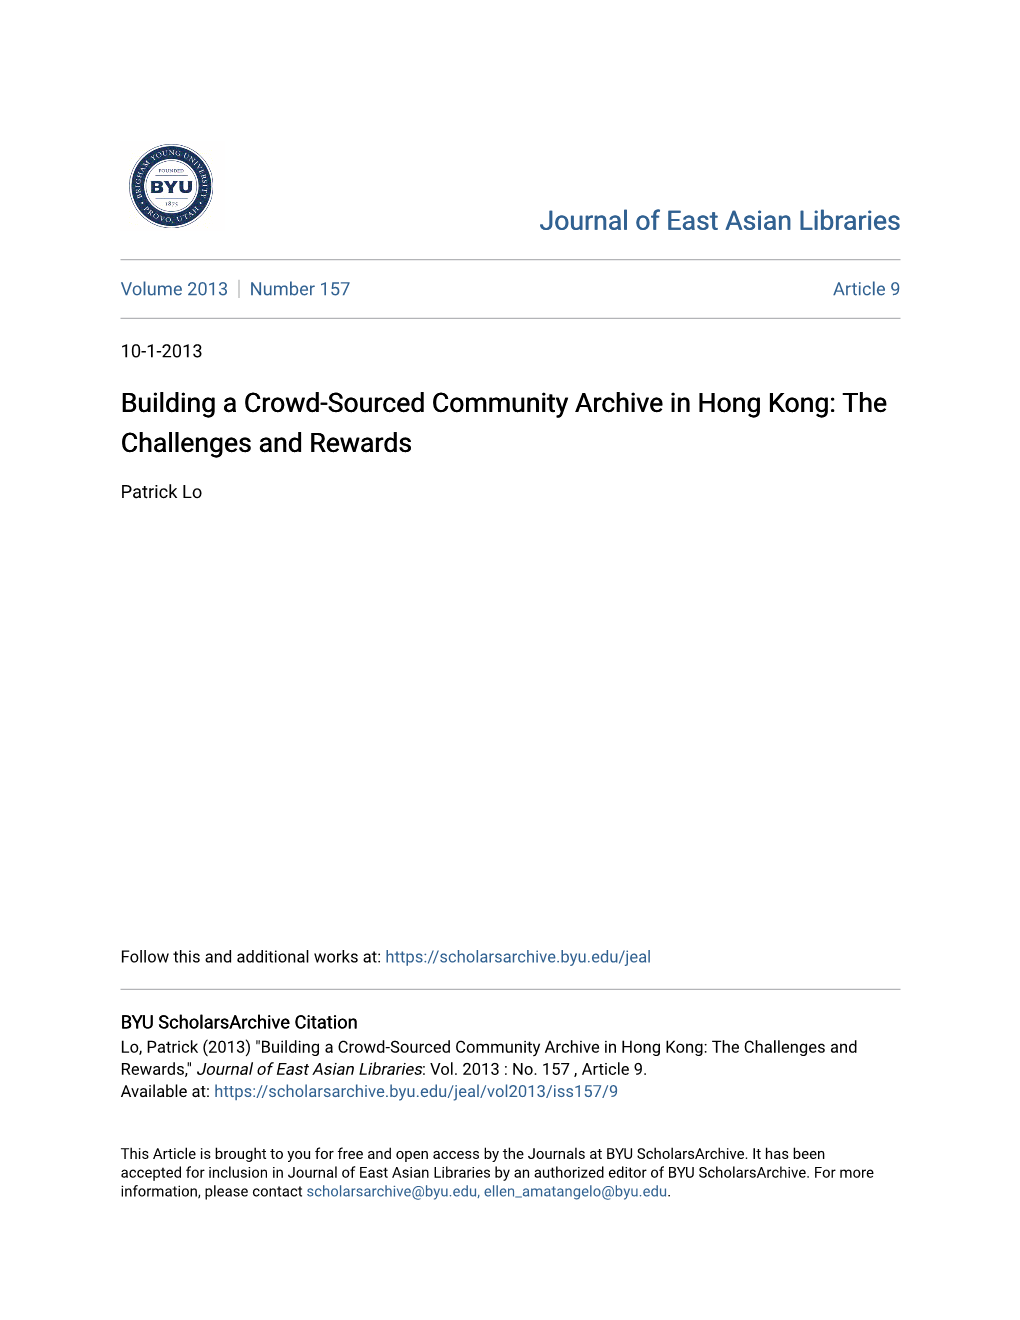 Building a Crowd-Sourced Community Archive in Hong Kong: the Challenges and Rewards